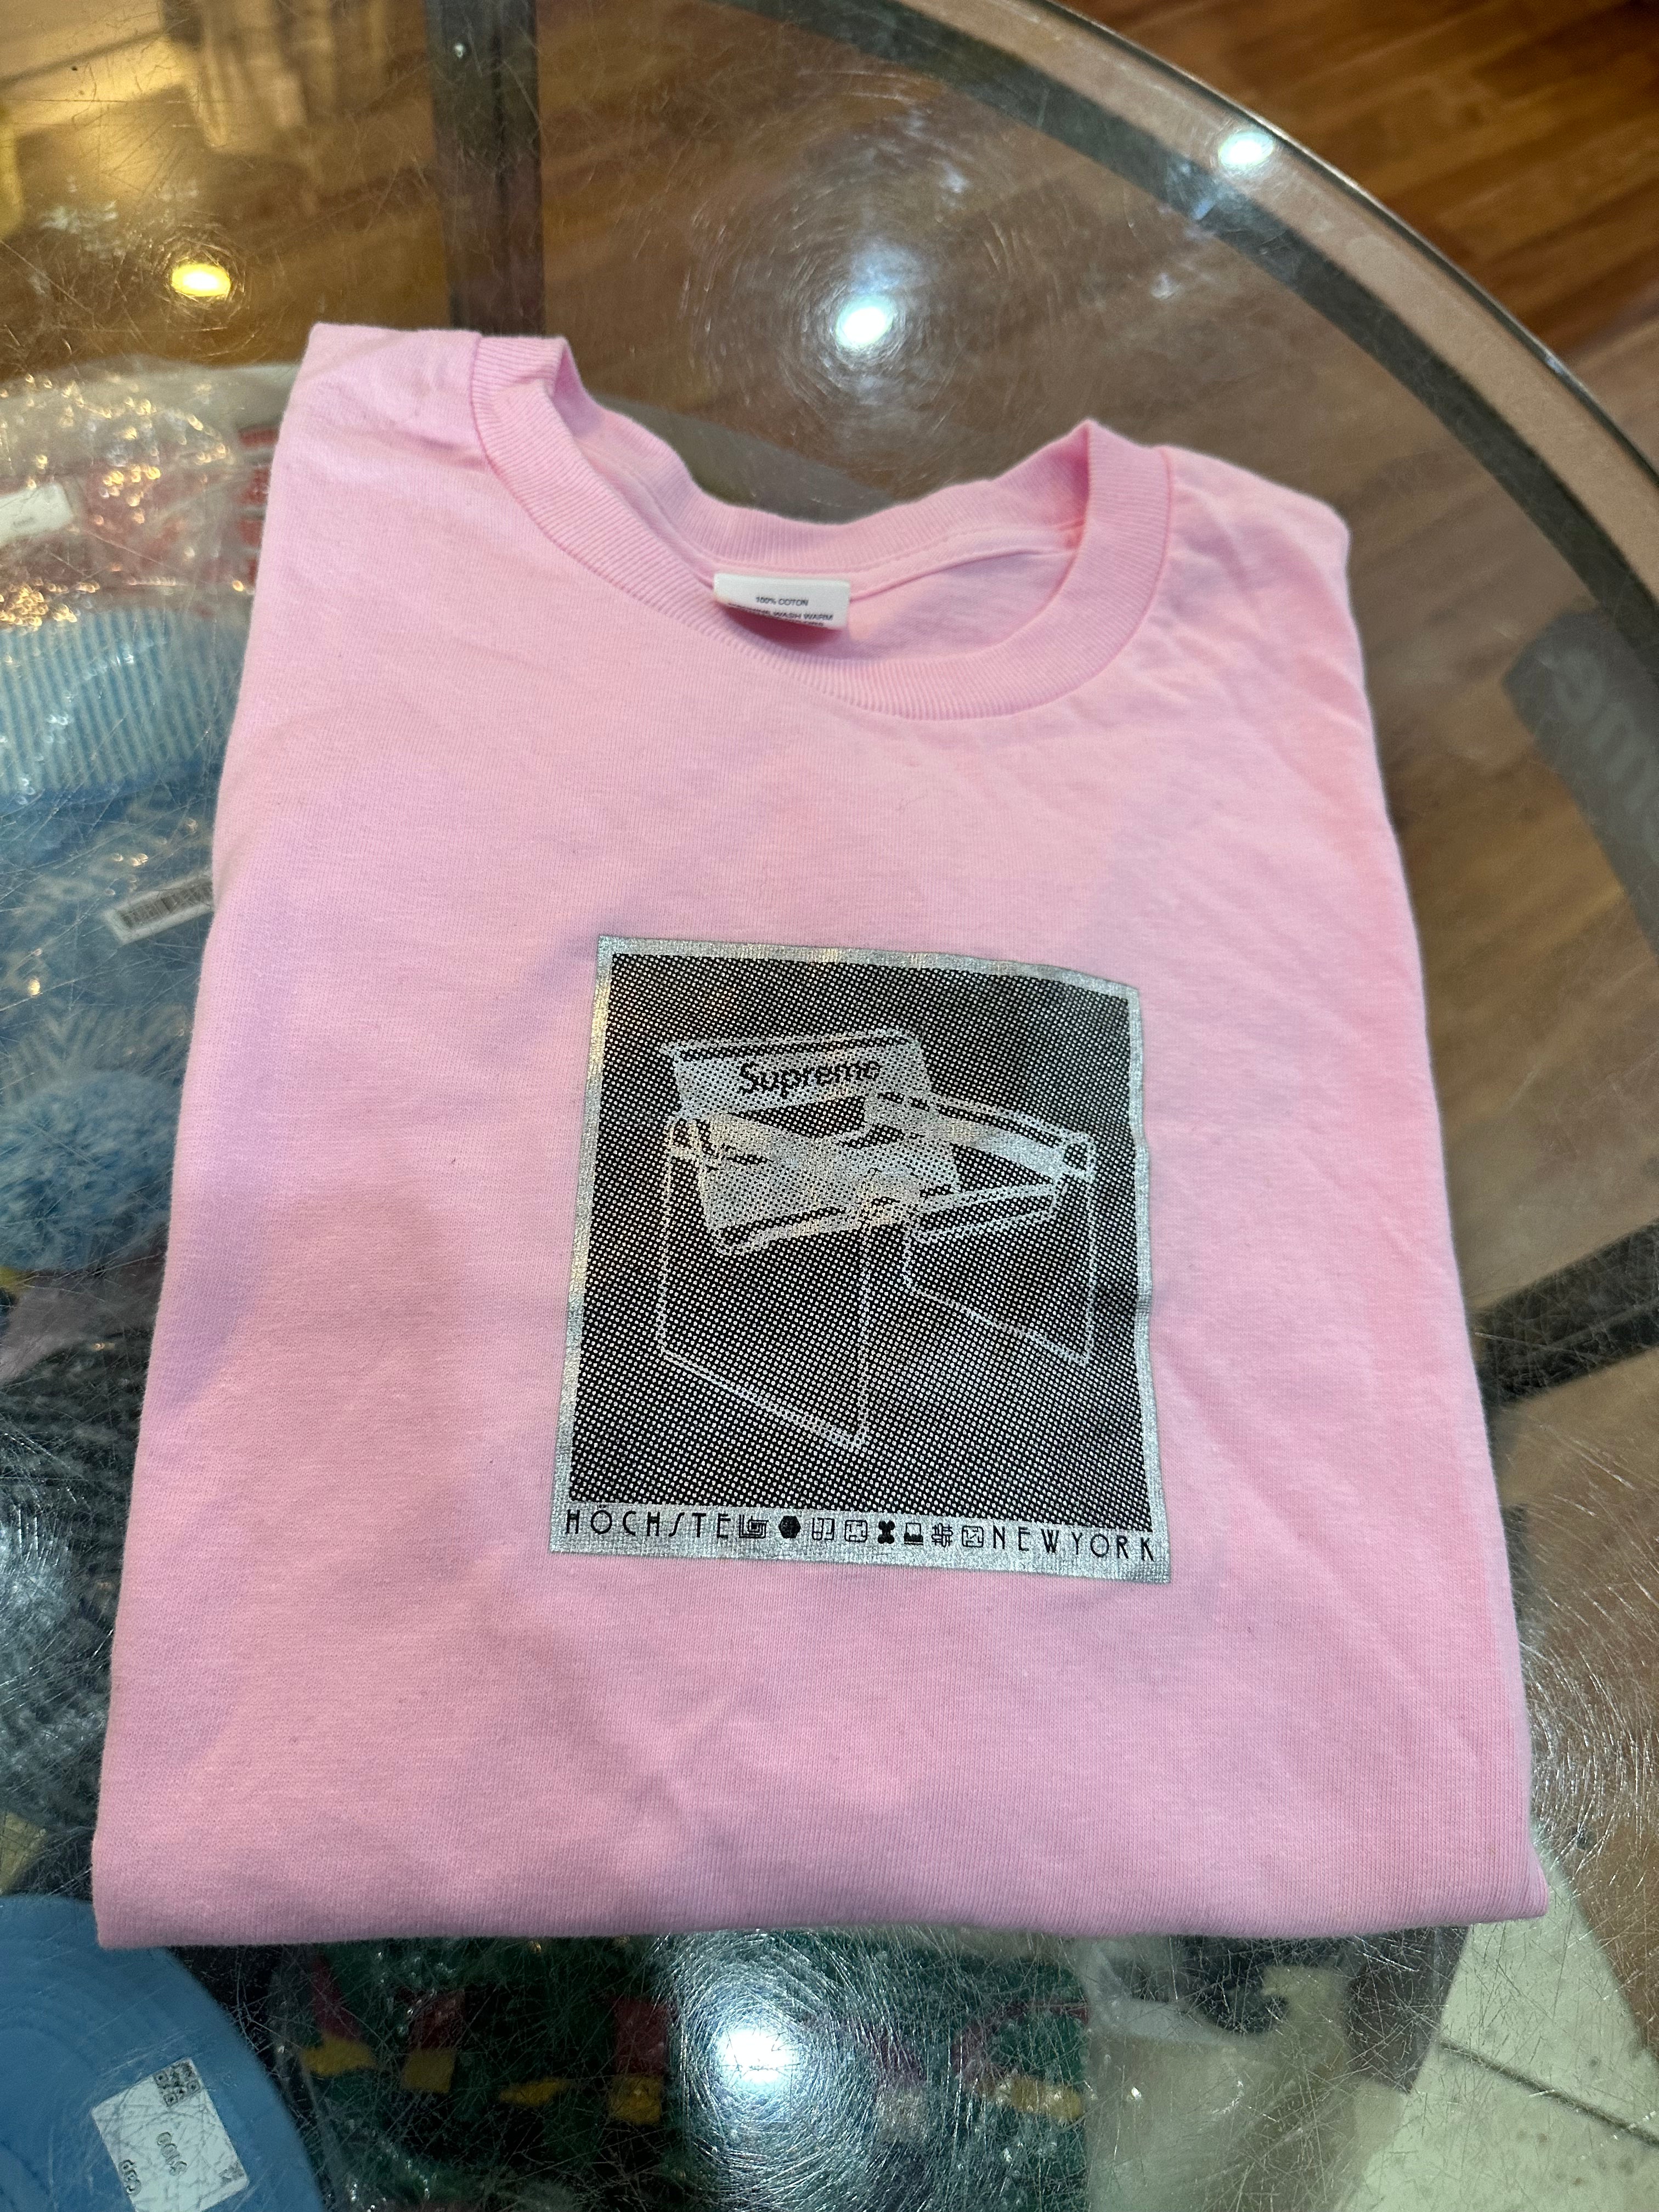 Brand new Light Pink Supreme Chair Tee Size Xlarge